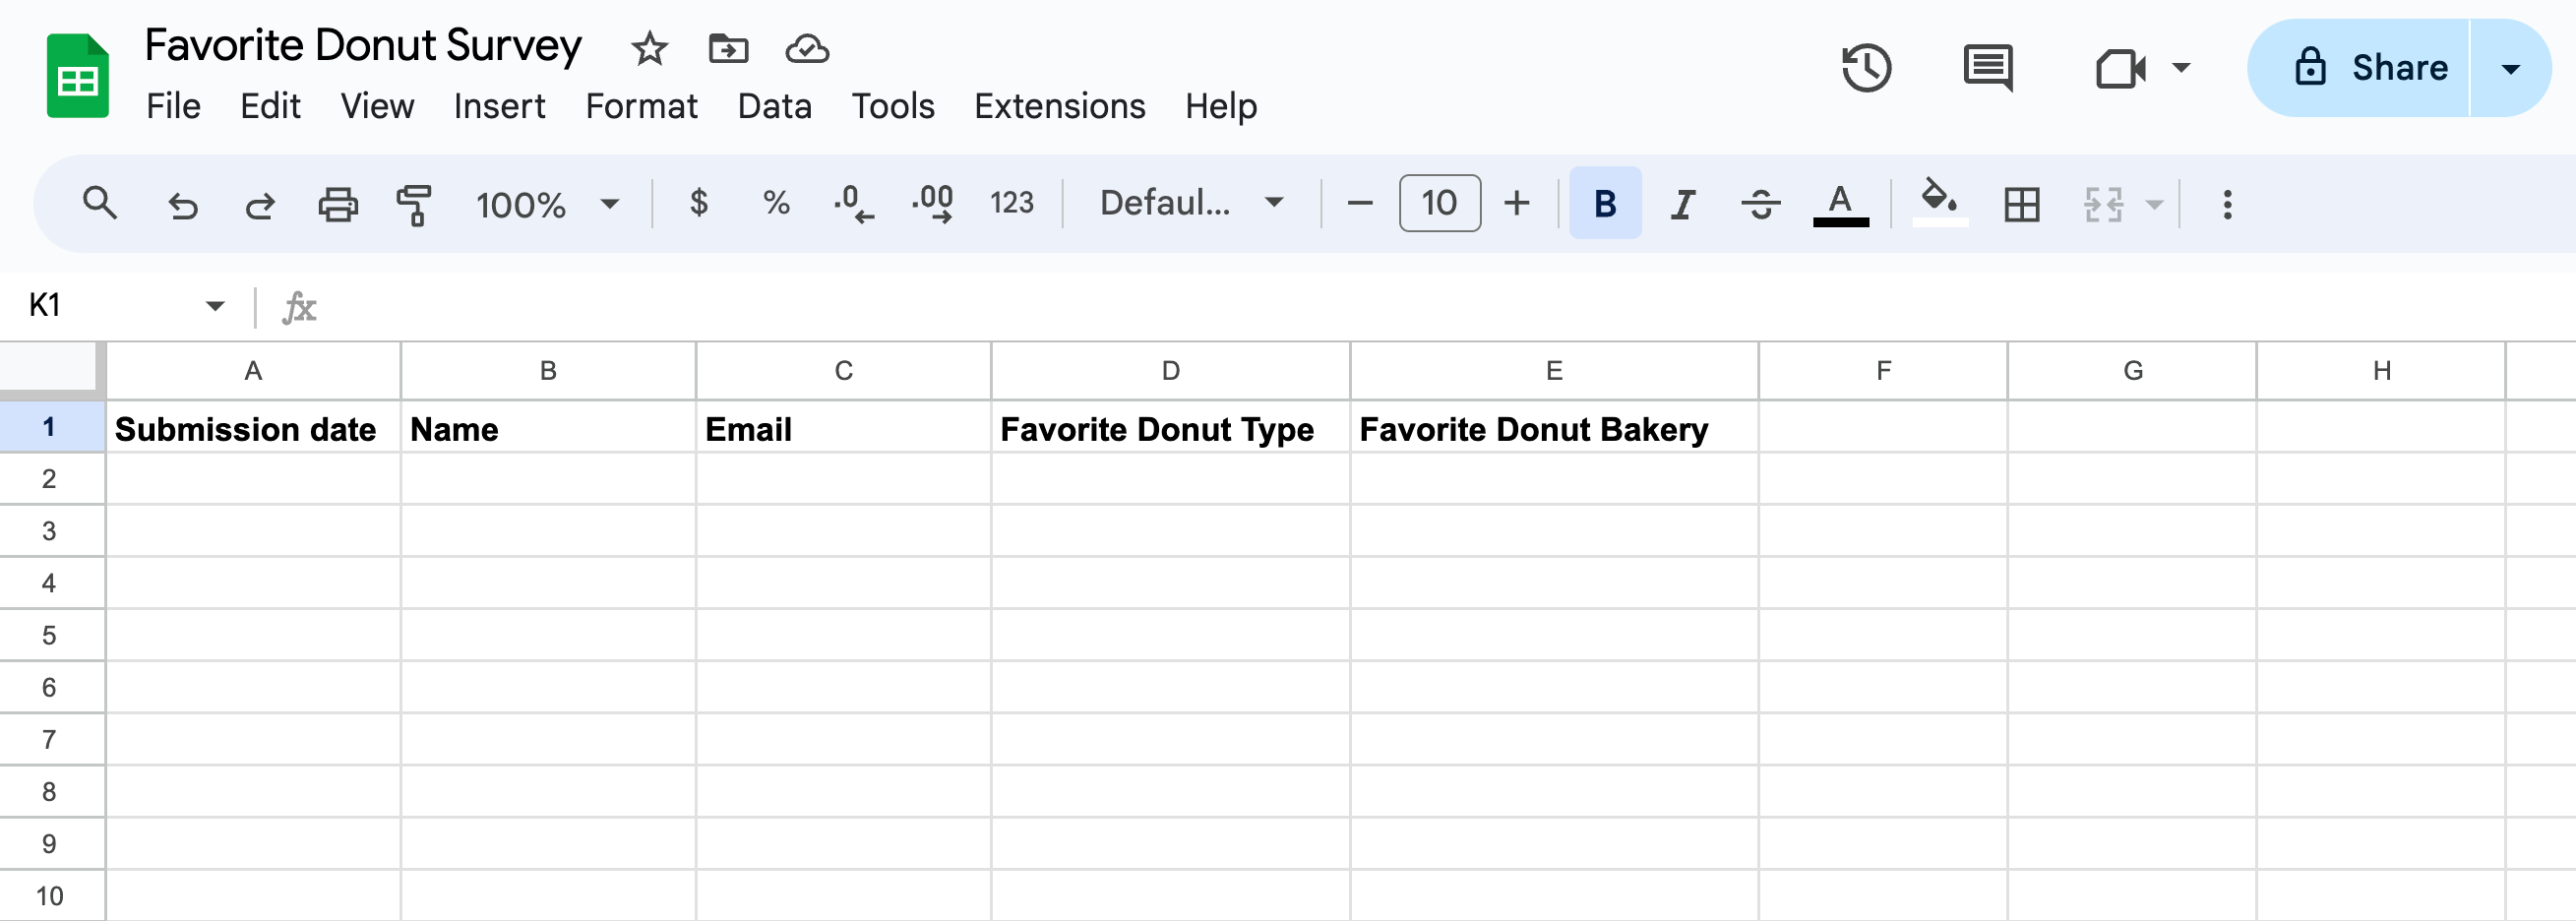 Google Sheet example with column headings